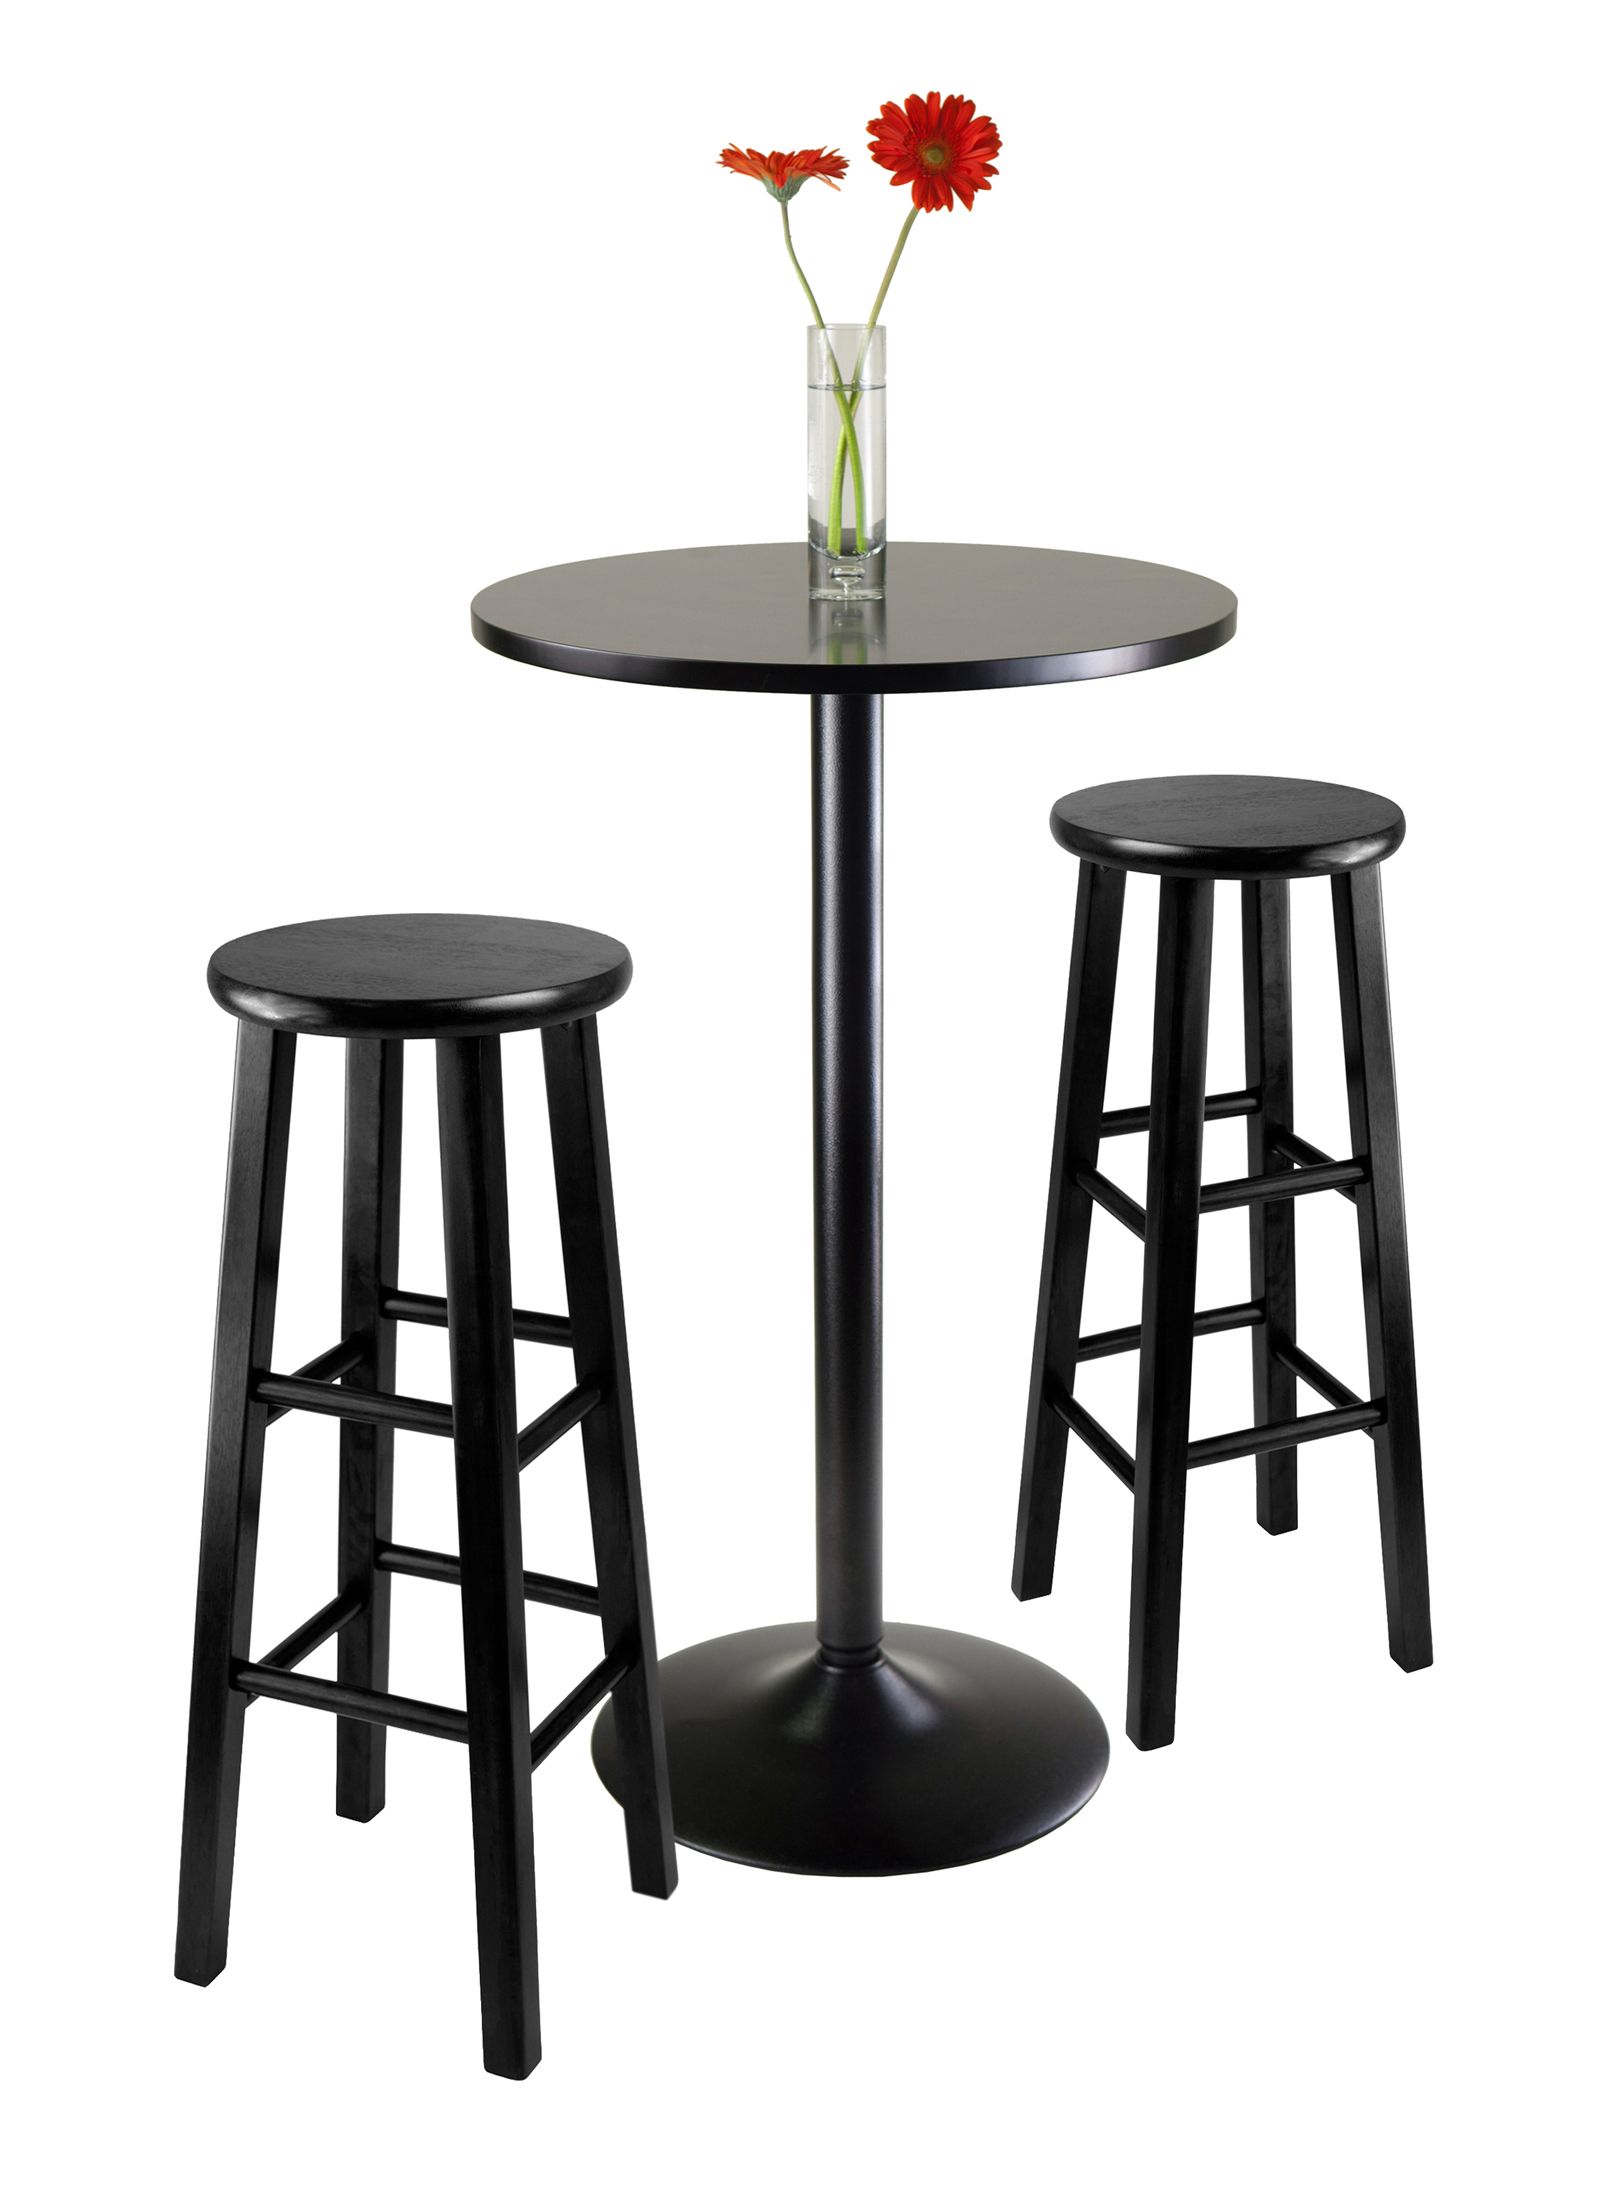 Preferred Winsome 3 Piece Counter Height Dining Sets Regarding Winsome Wood Obsidian 3 Piece Round Black Pub Table Set – $ (View 12 of 20)